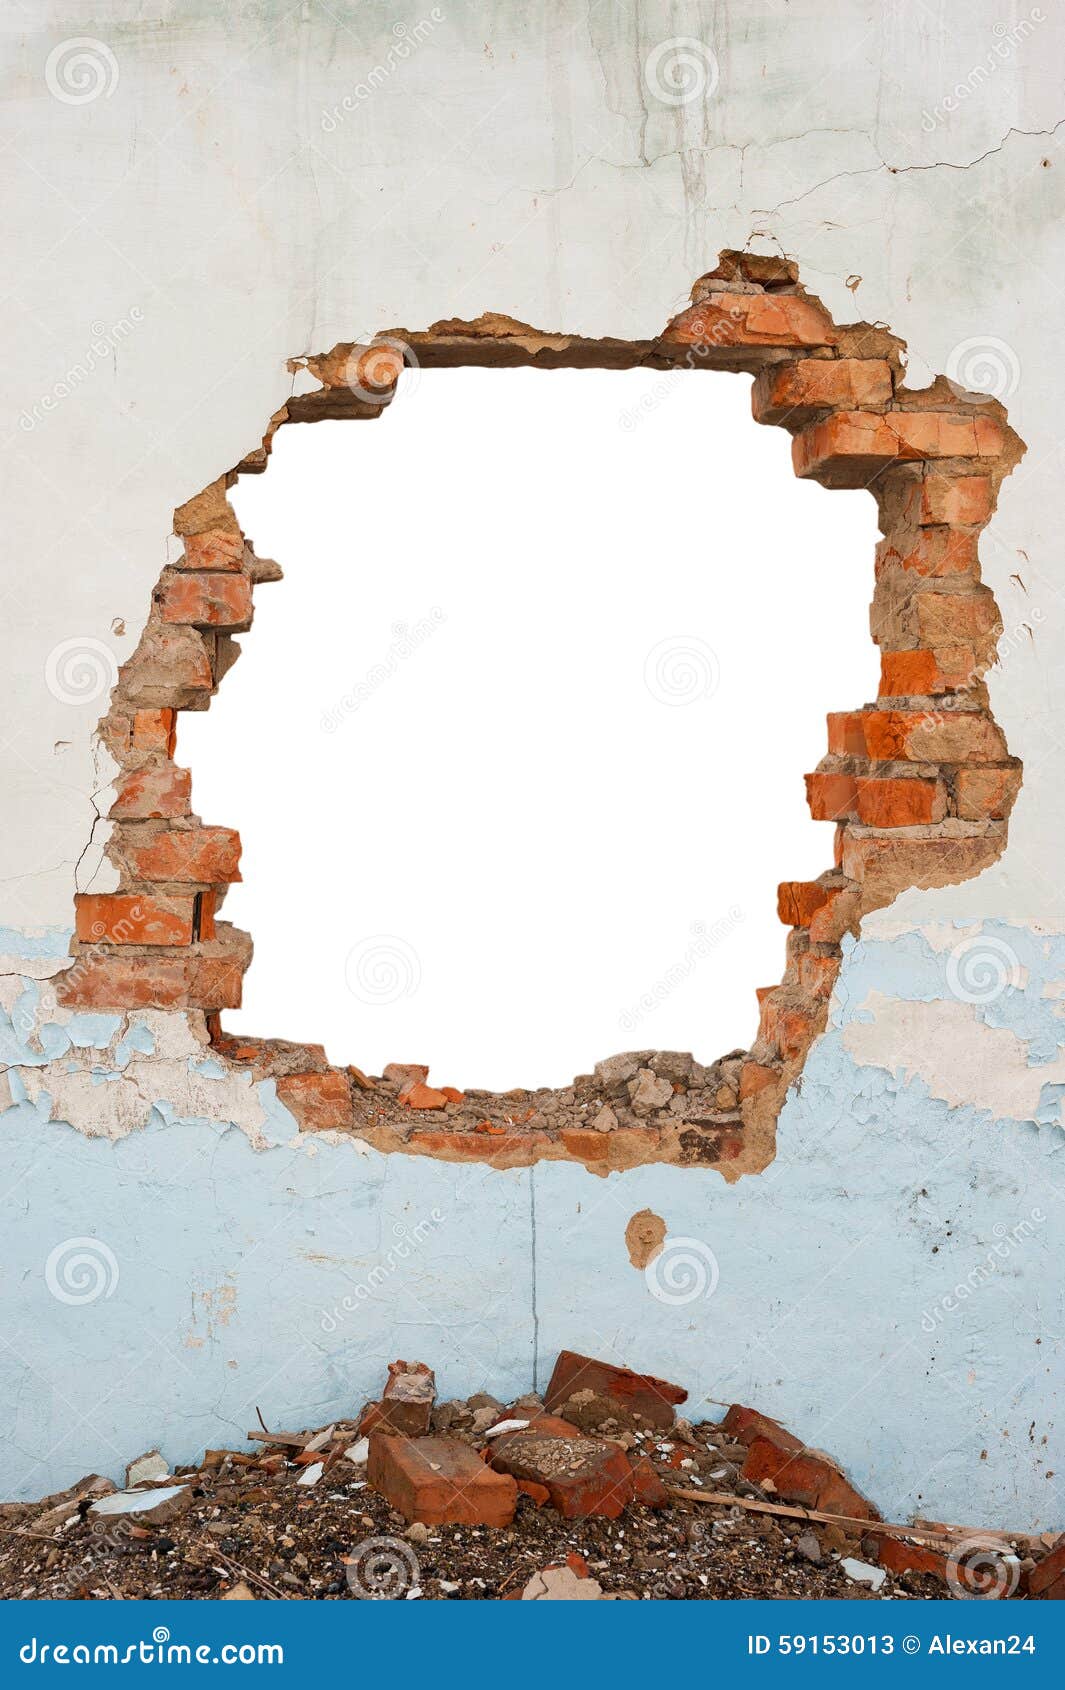 Hole brick wall stock image. Image of cement, backgrounds - 59153013